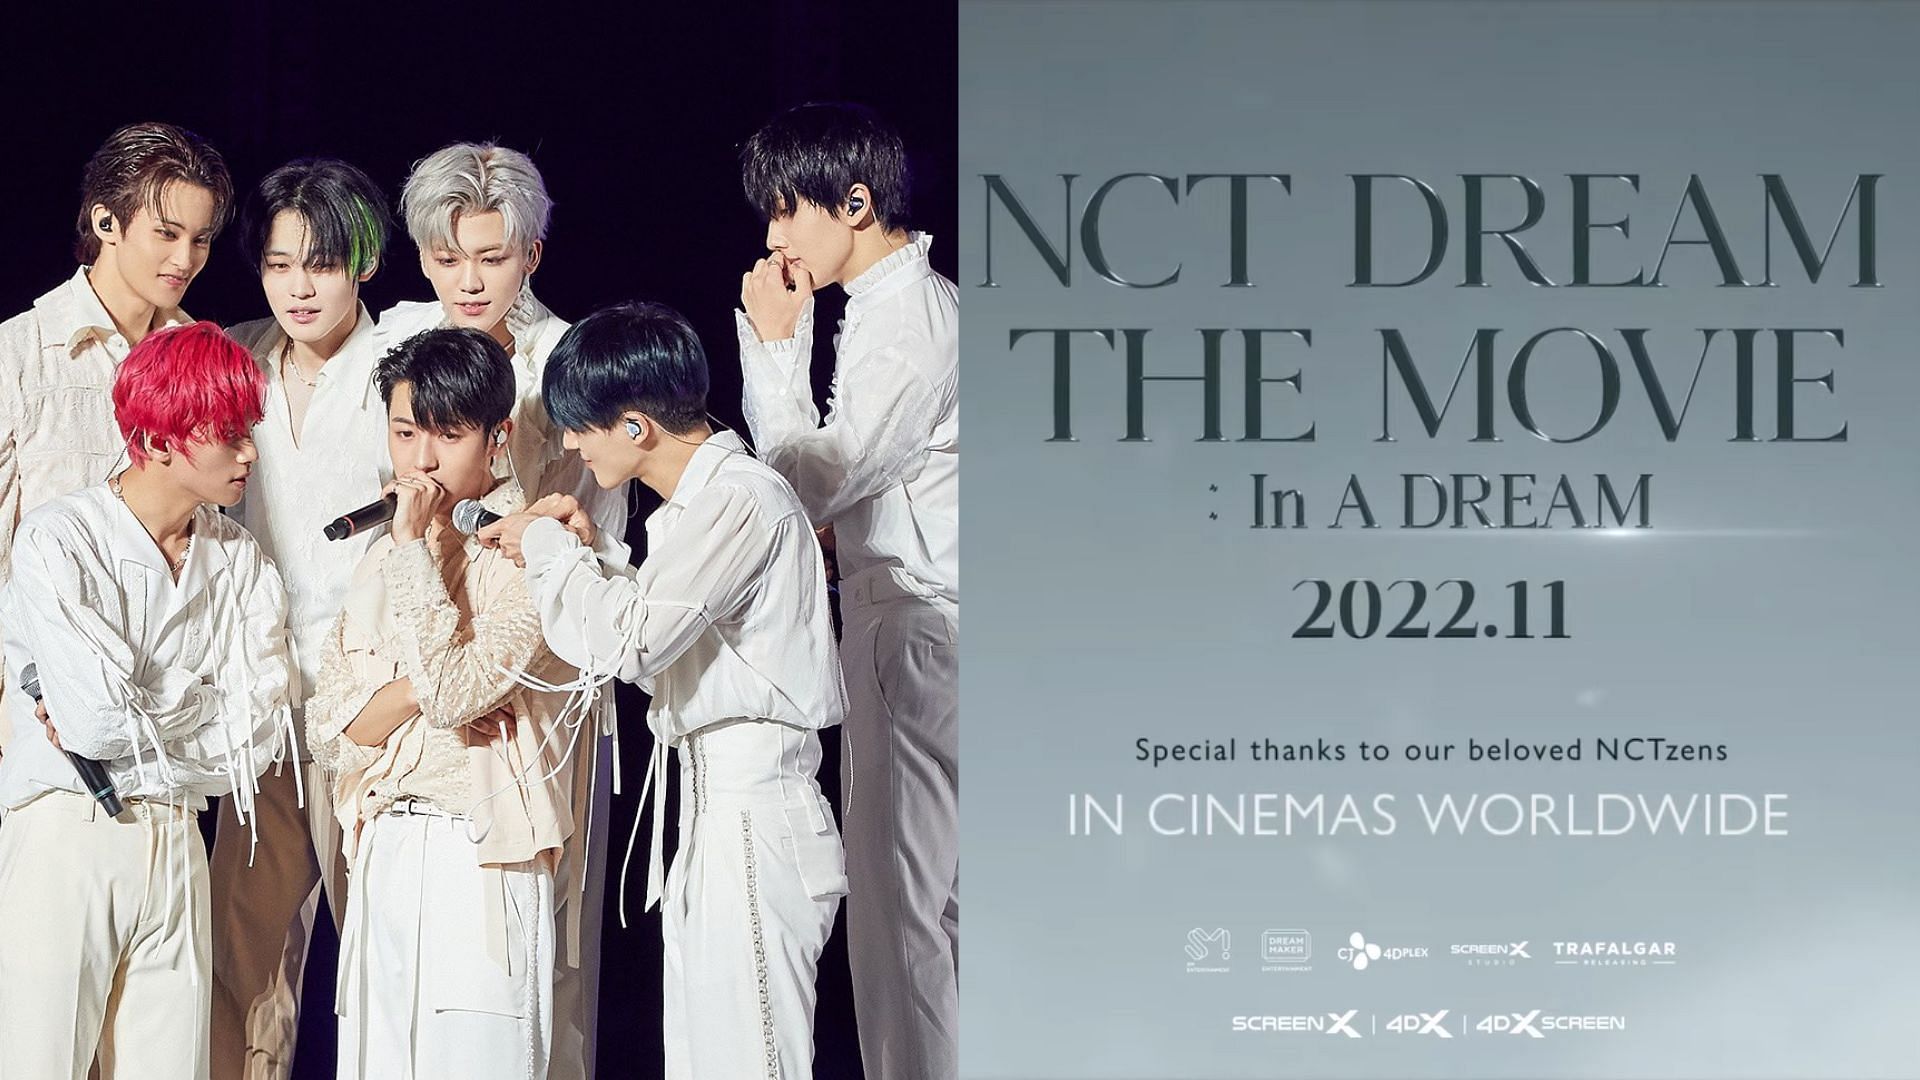 NCT DREAM to release their first movie in theaters worldwide starting November (Images via Twitter/NCTsmtown_DREAM and YouTube/ScreenX KOREA)